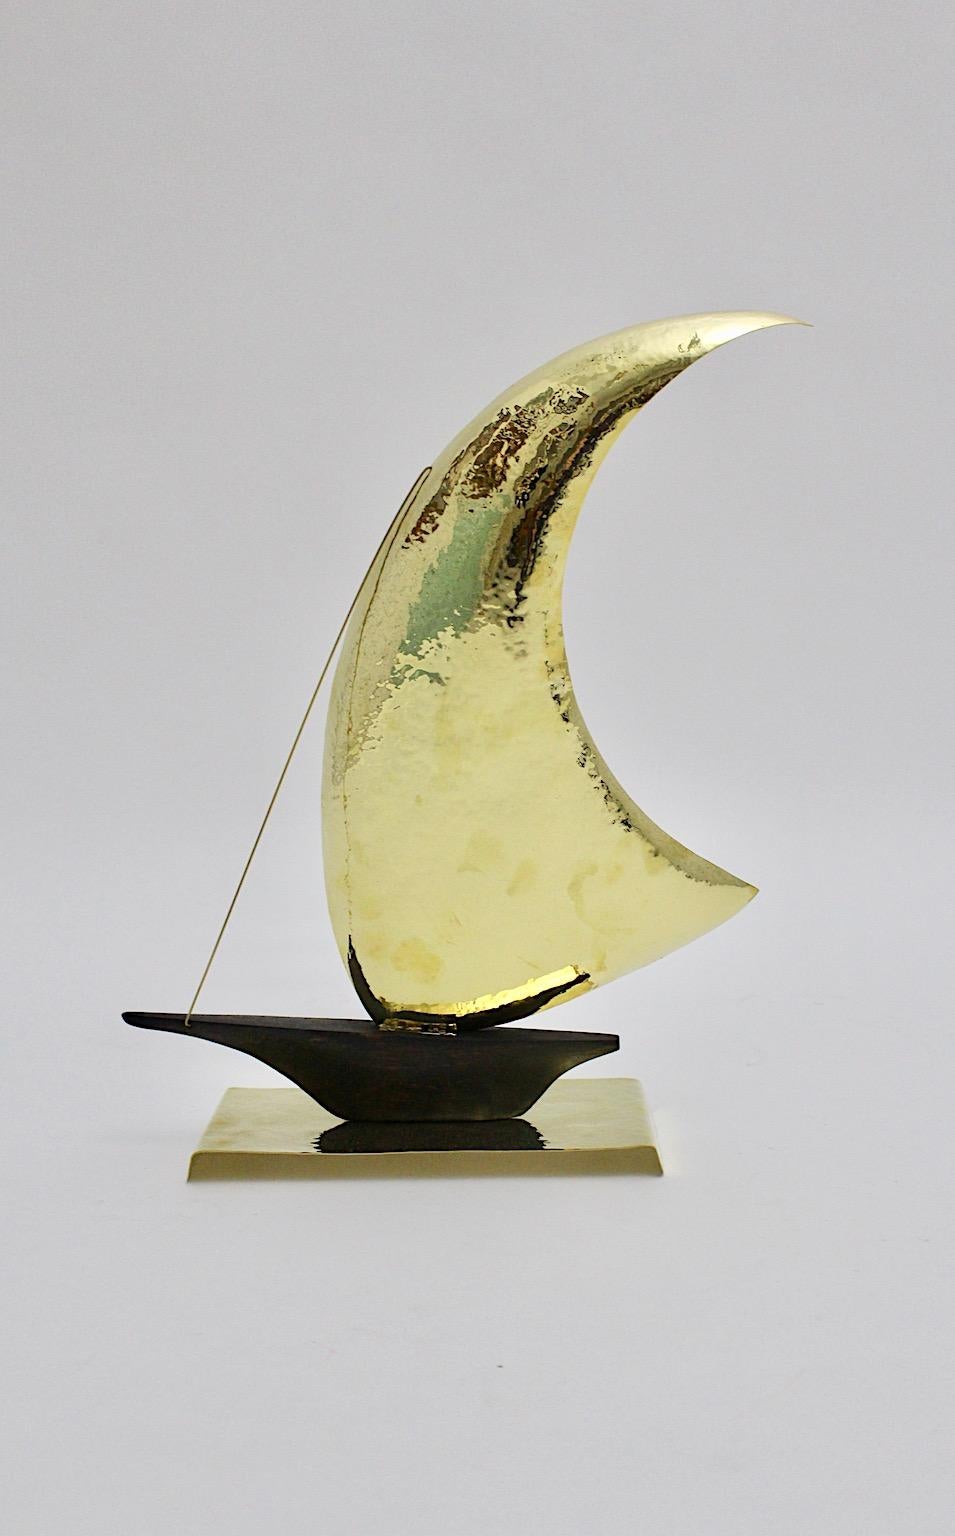 Mid Century Modern vintage sailing ship from hammered brass and oakwood designed and executed in Vienna 1950 in the style of Franz Hagenauer.
This amazing sailing ship from stained oakwood with a brass hammered sail and base is a beautiful work from